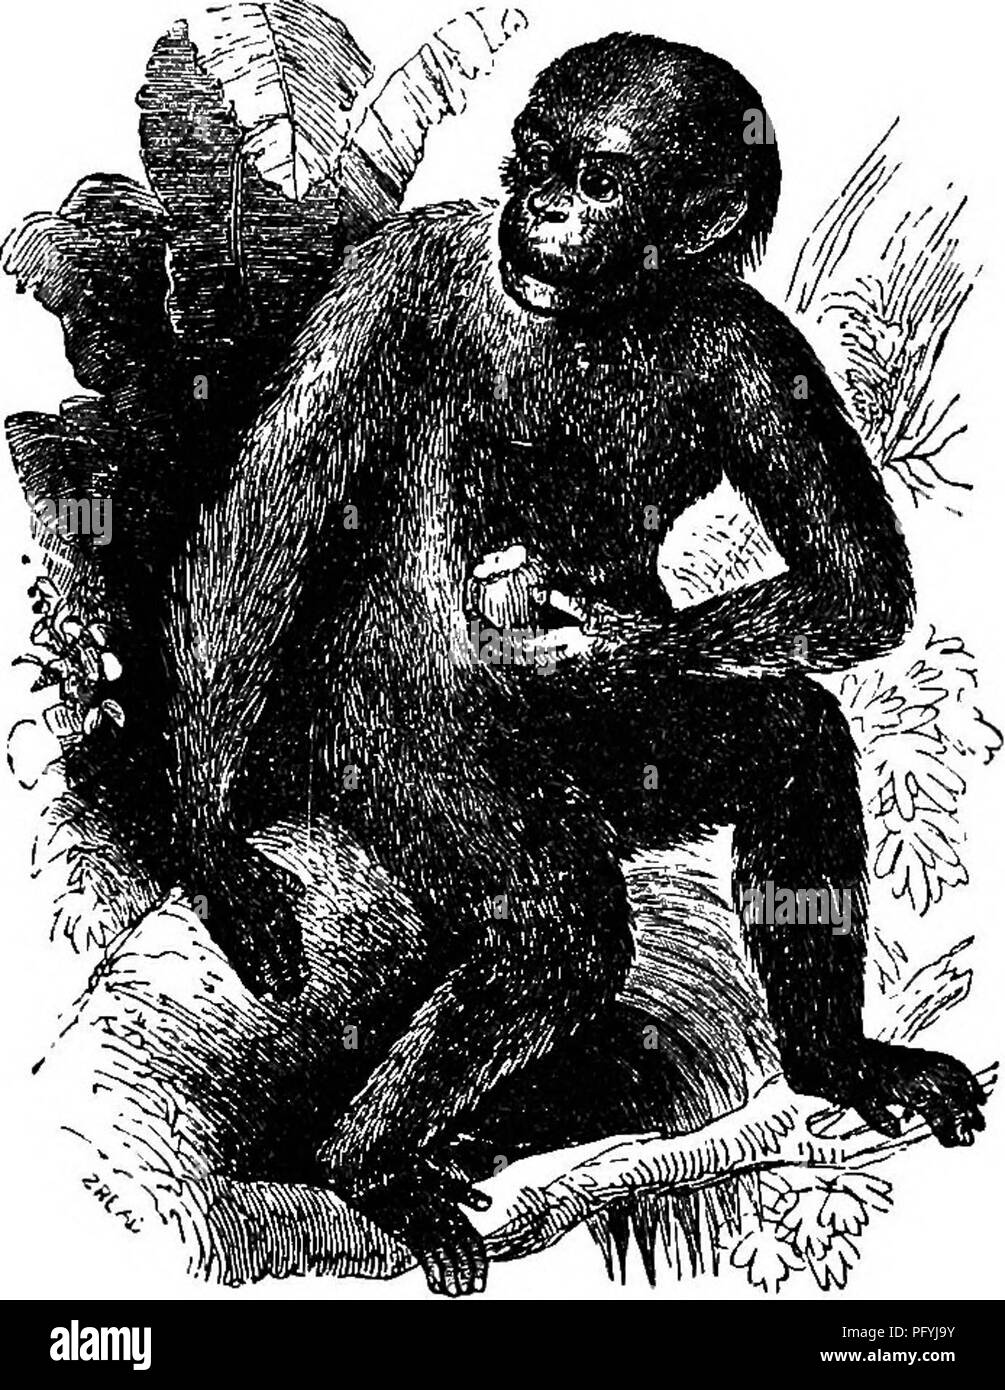 . Illustrated natural history : comprising descriptions of animals, birds, fishes, reptiles, insects, etc., with sketches of their peculiar habits and characteristics . Zoology. APES. 31 stood aghast in a most ludicrously terrified attitude, with its eyus intently fixed on the frightful object. The Chimpanzee is a native of Western Africa, and ia kolerabiy common on the banks of the Gambia and in â Congo. Large bands of these formidable apes congregate together and unite in repelling an invader, which they do with such fury and courage, that even the dread- ed elephant and lion are driven from Stock Photo